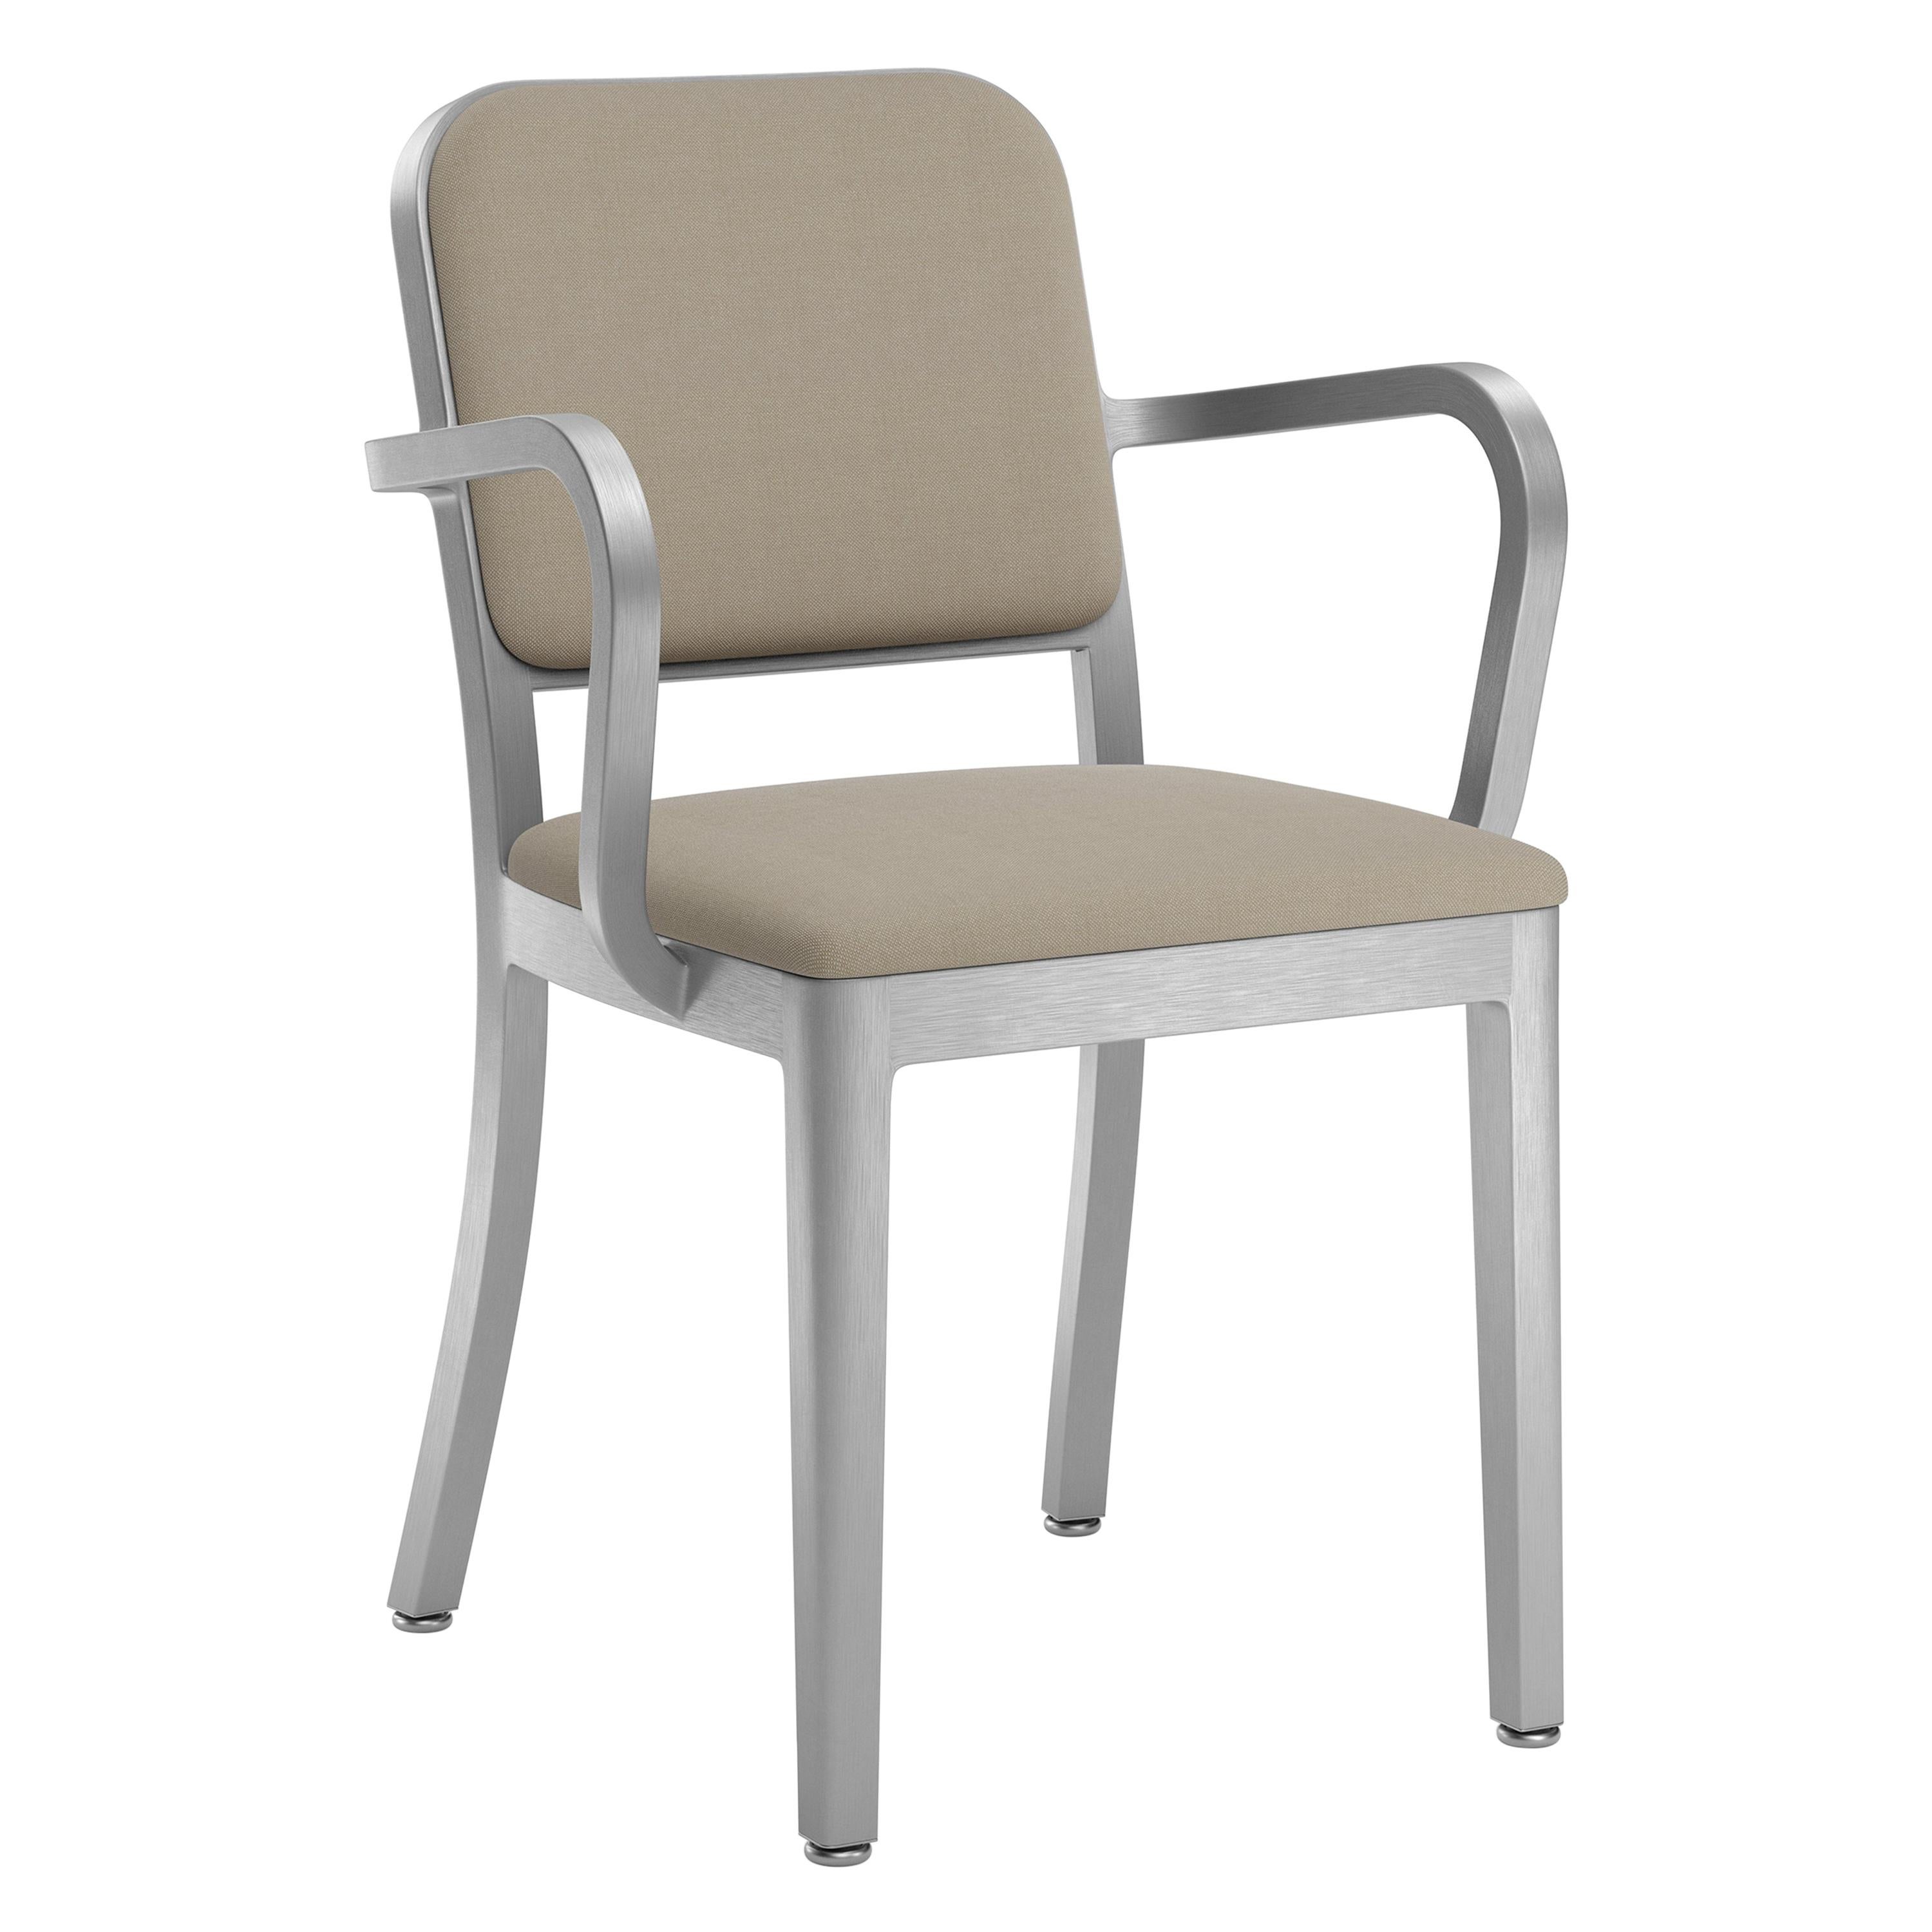 Emeco Navy Officer Armchair in Beige Fabric with Brushed Aluminum Frame For Sale